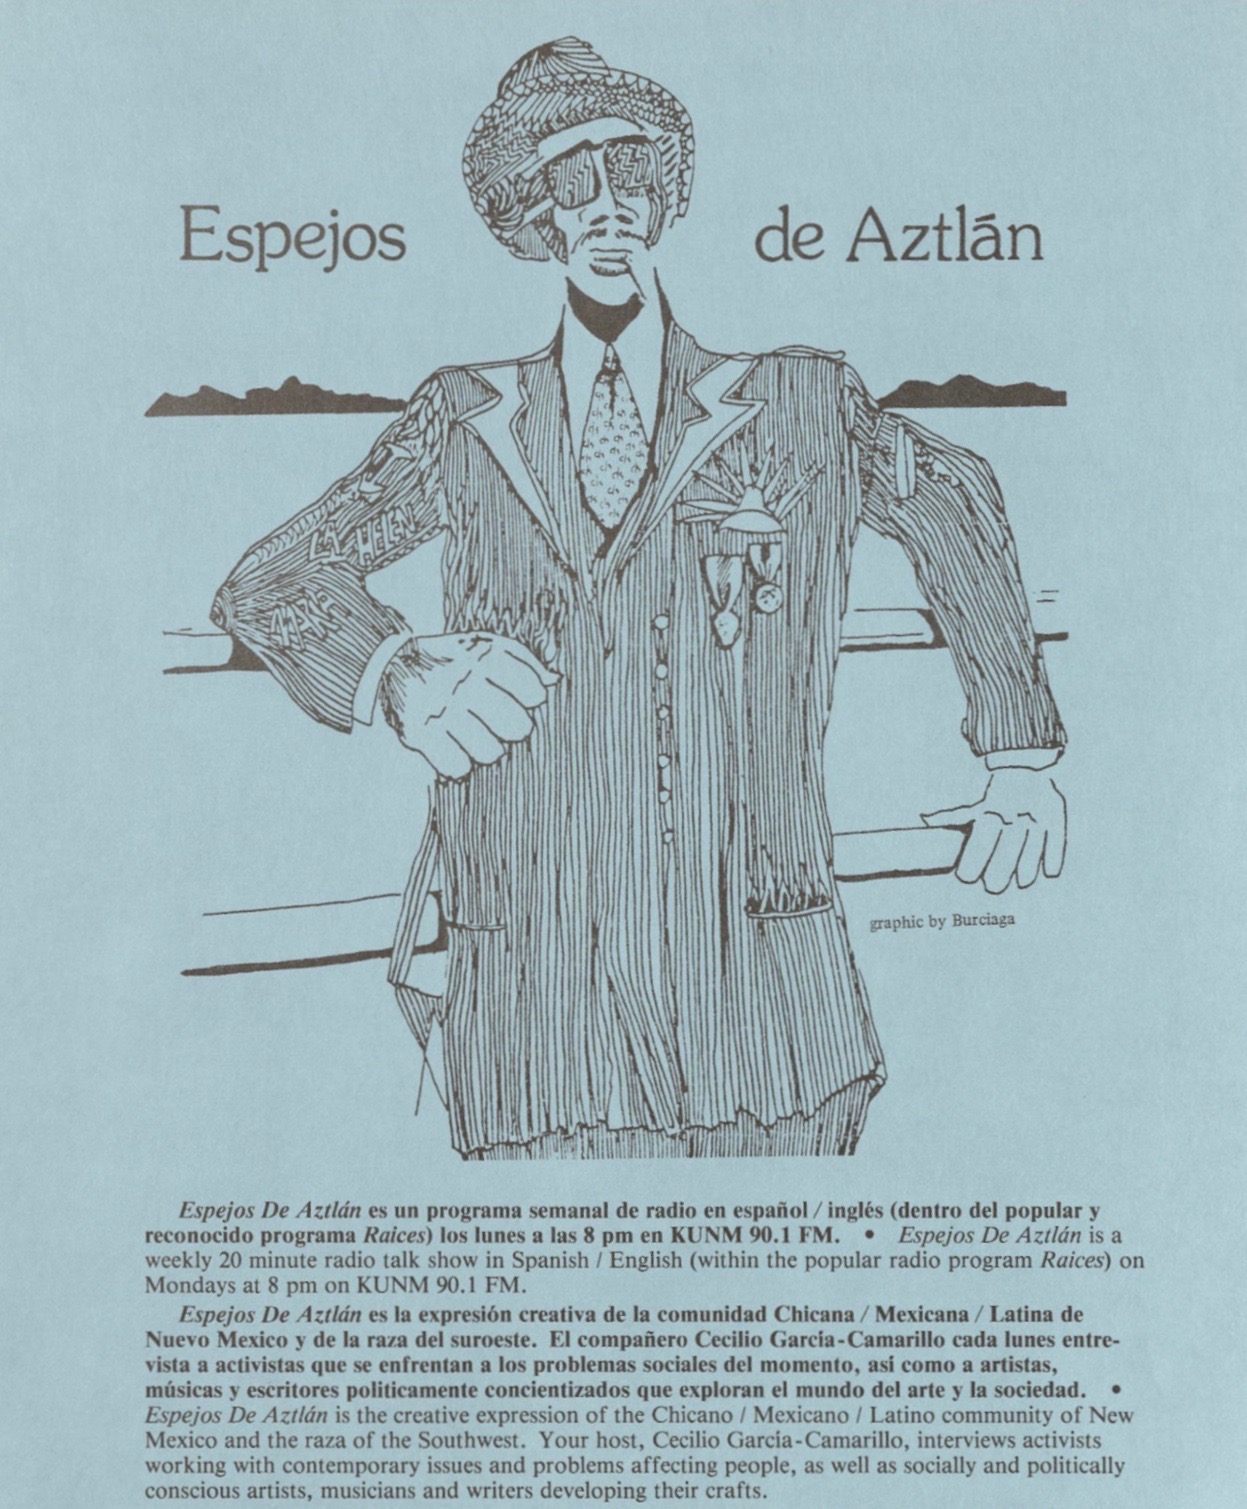 Illustration featuring someone in a hat walking, with a blue backdrop and label "Espejos de Aztlán".